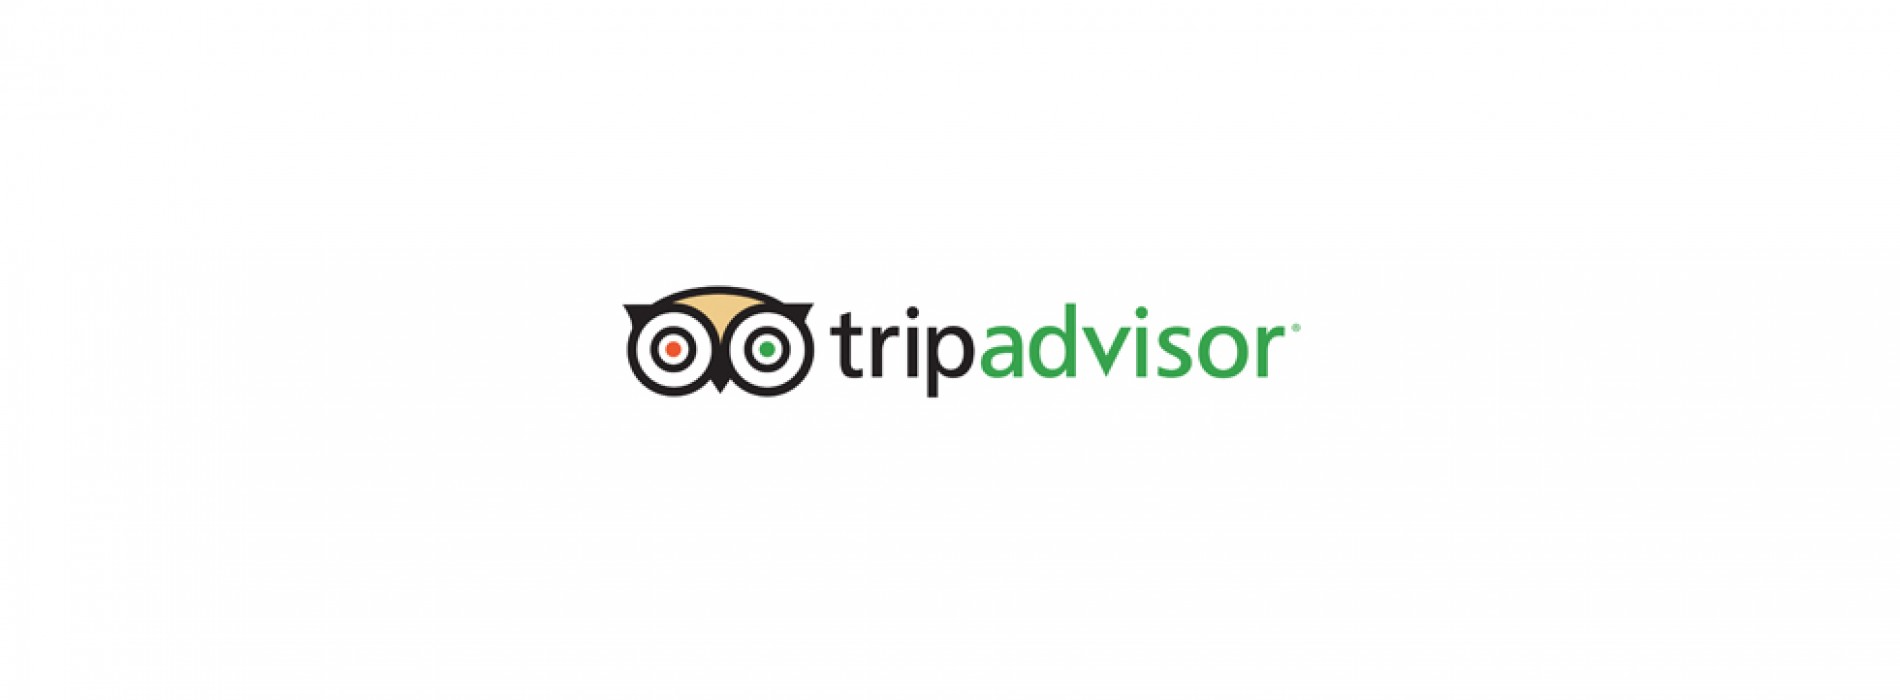 TripAdvisor hotel pricing report reveals best time for indians to go to popular travel destinations worldwide